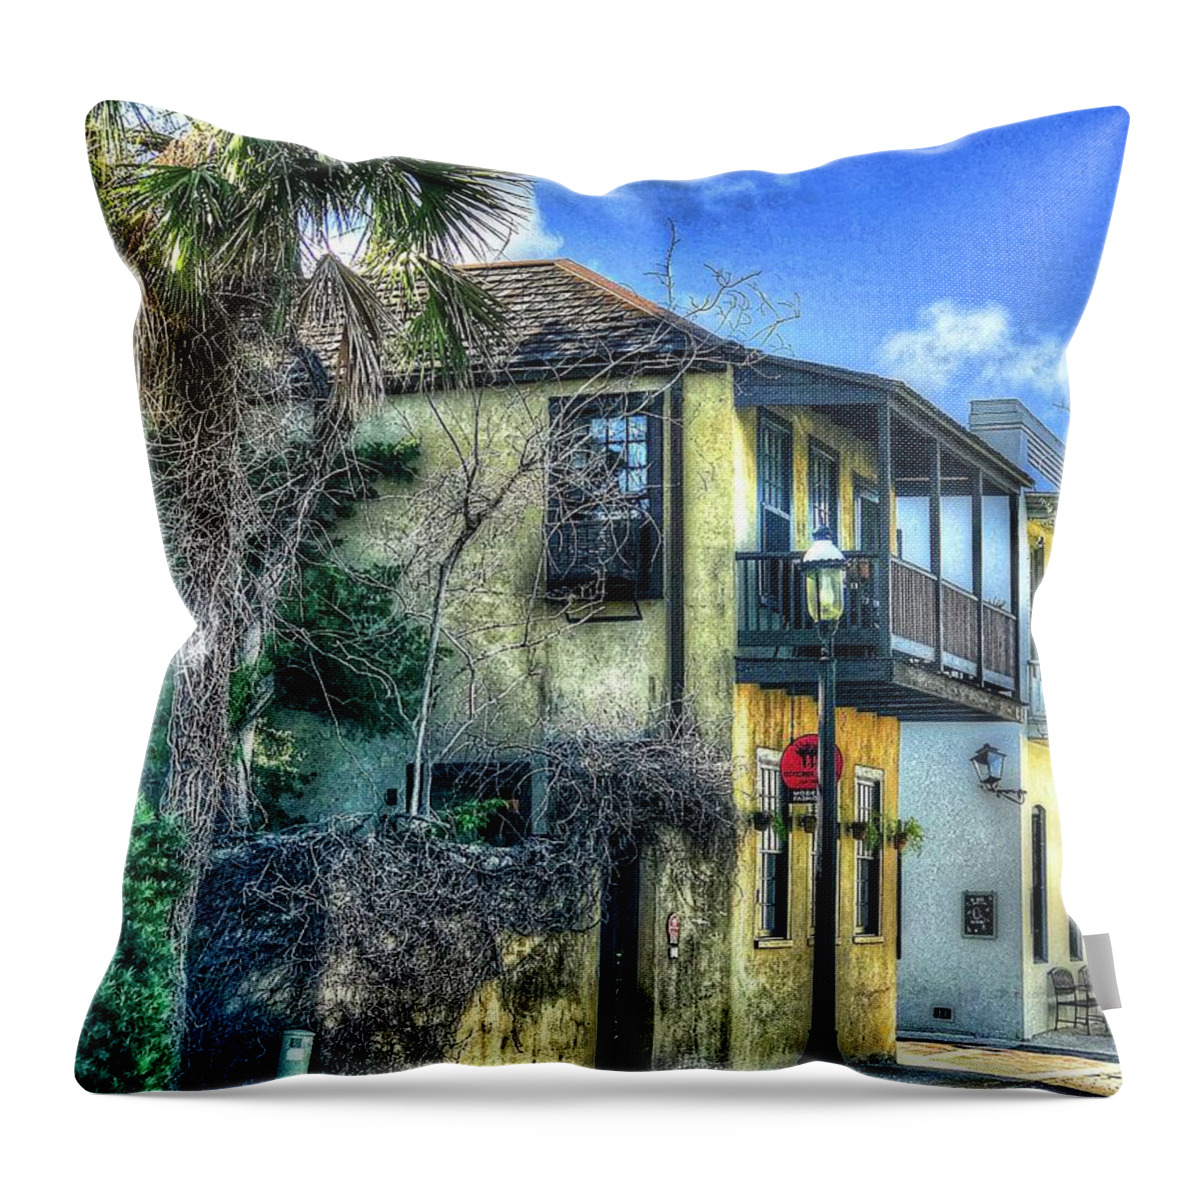 House Throw Pillow featuring the photograph St. Augustine House by Debbi Granruth